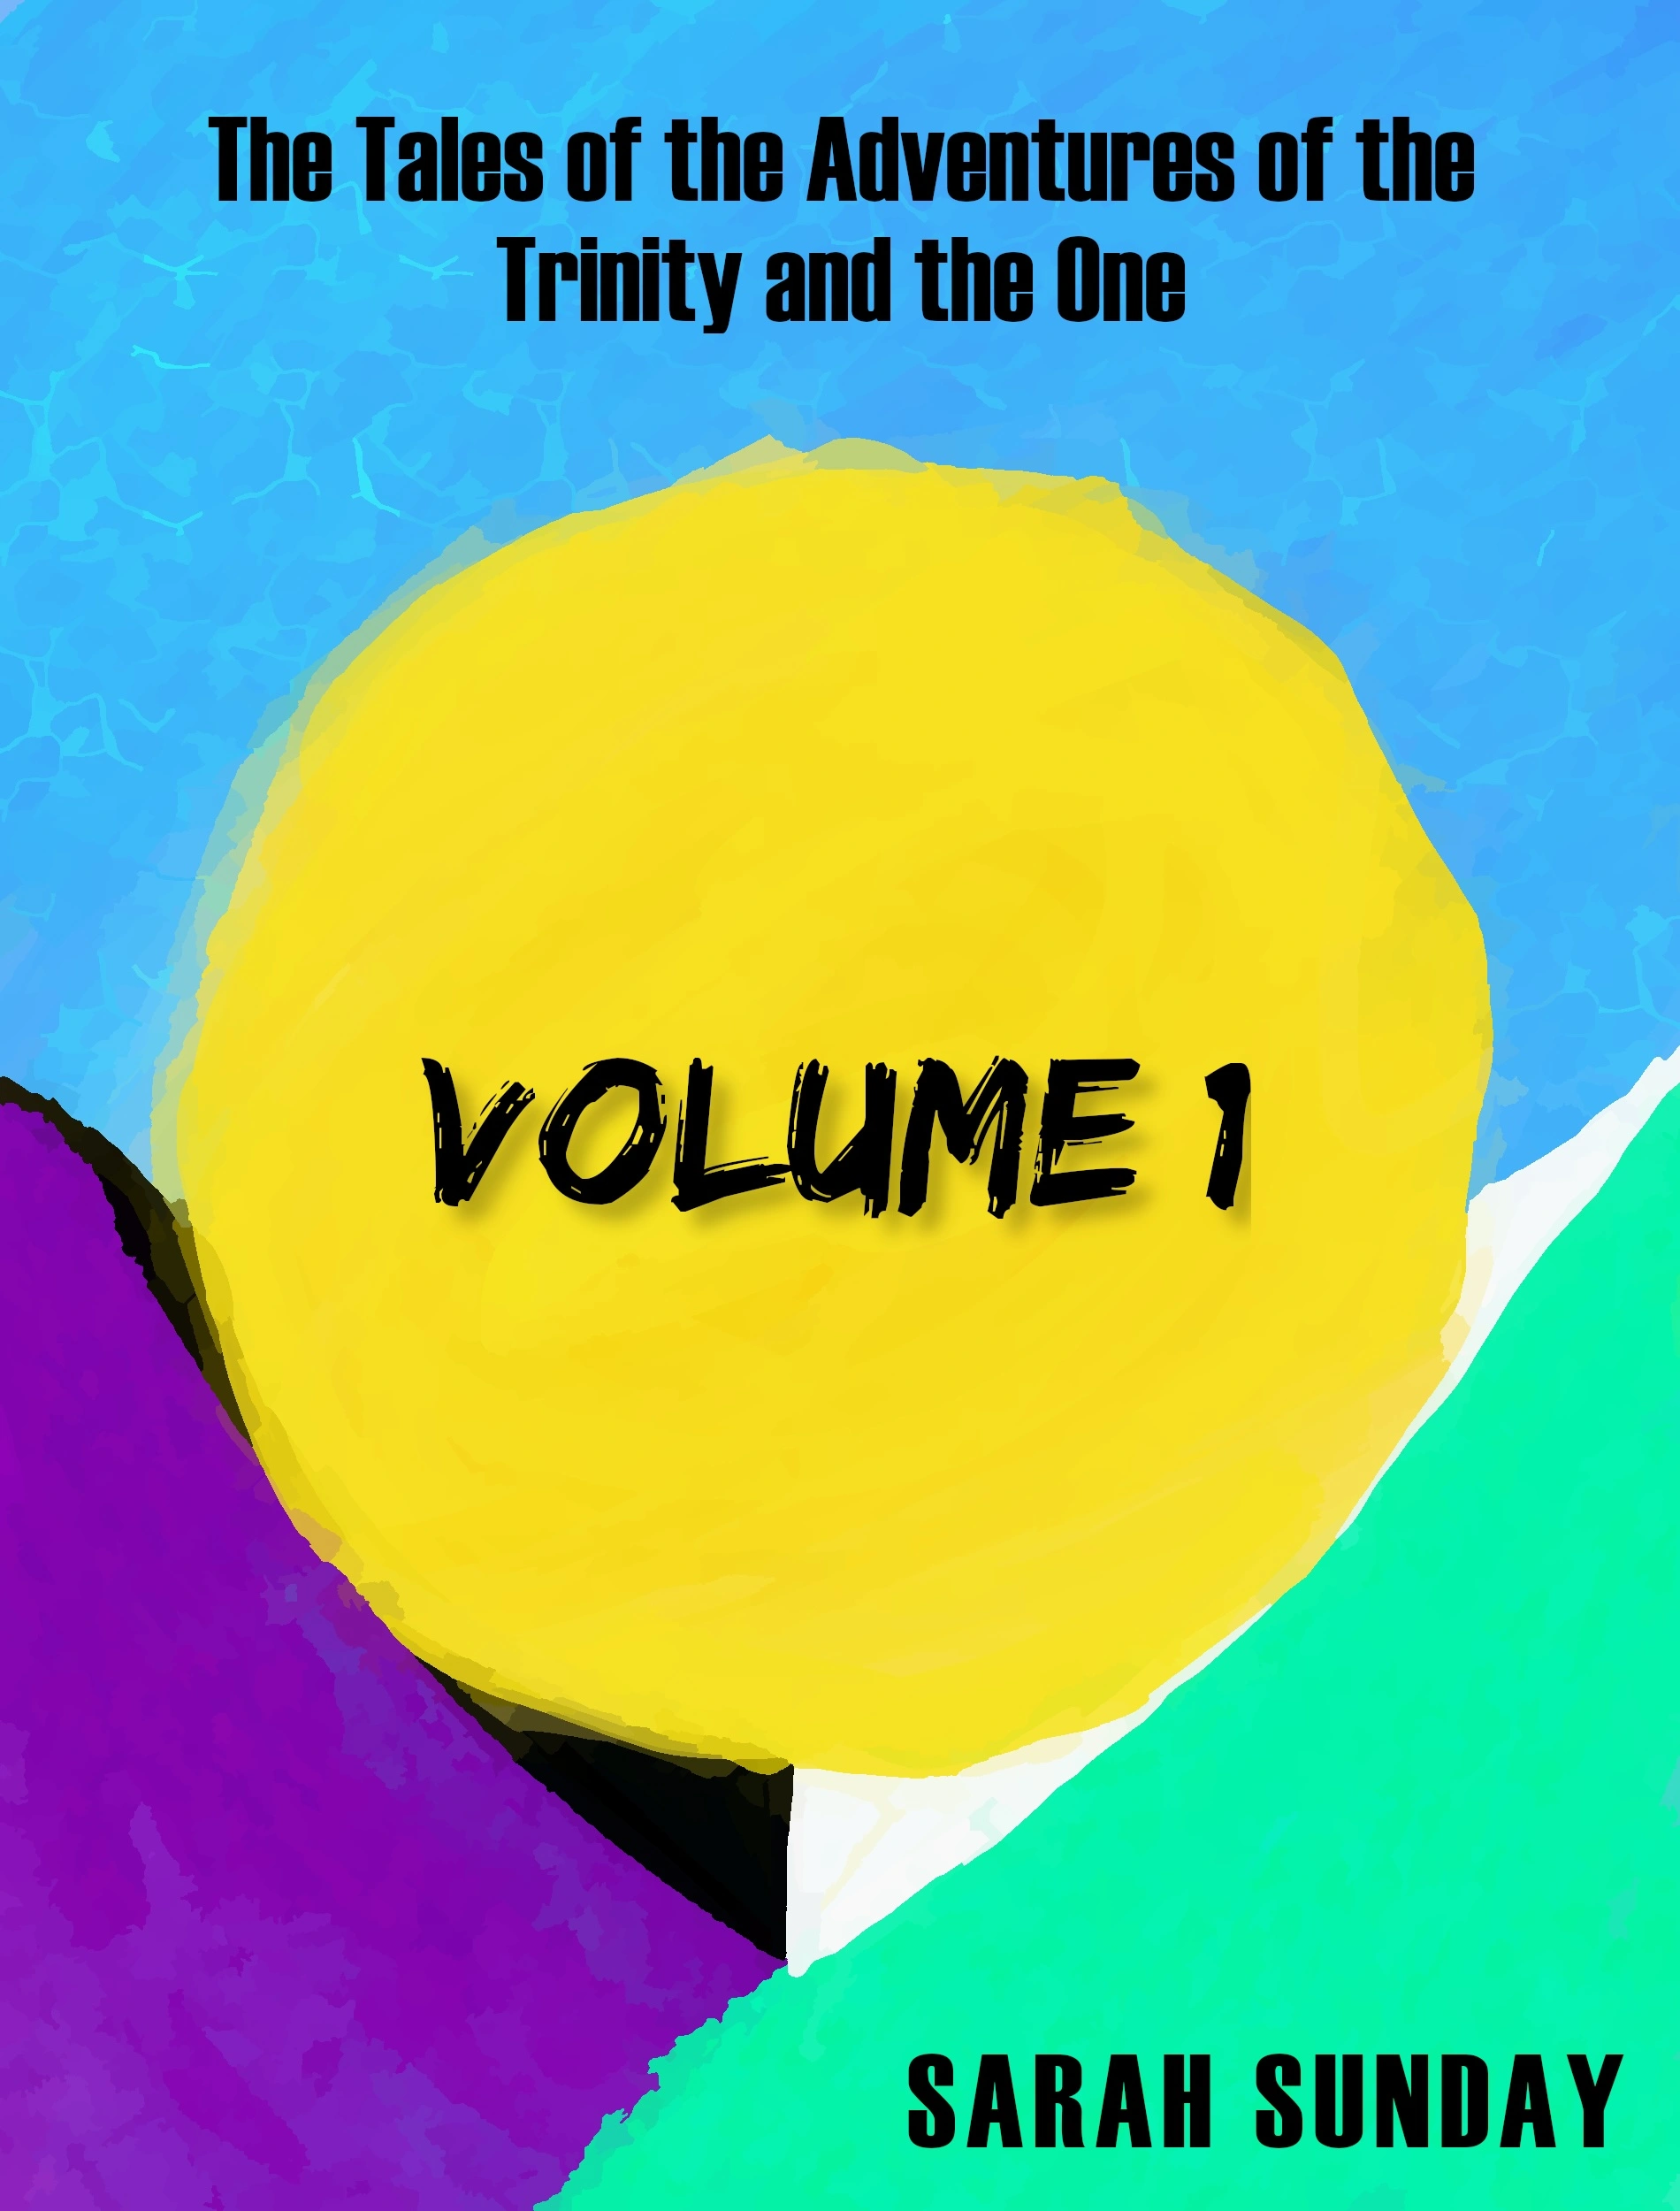 Tales of the Trinity and the One Volume 1, aka Book 11 RELEASED!